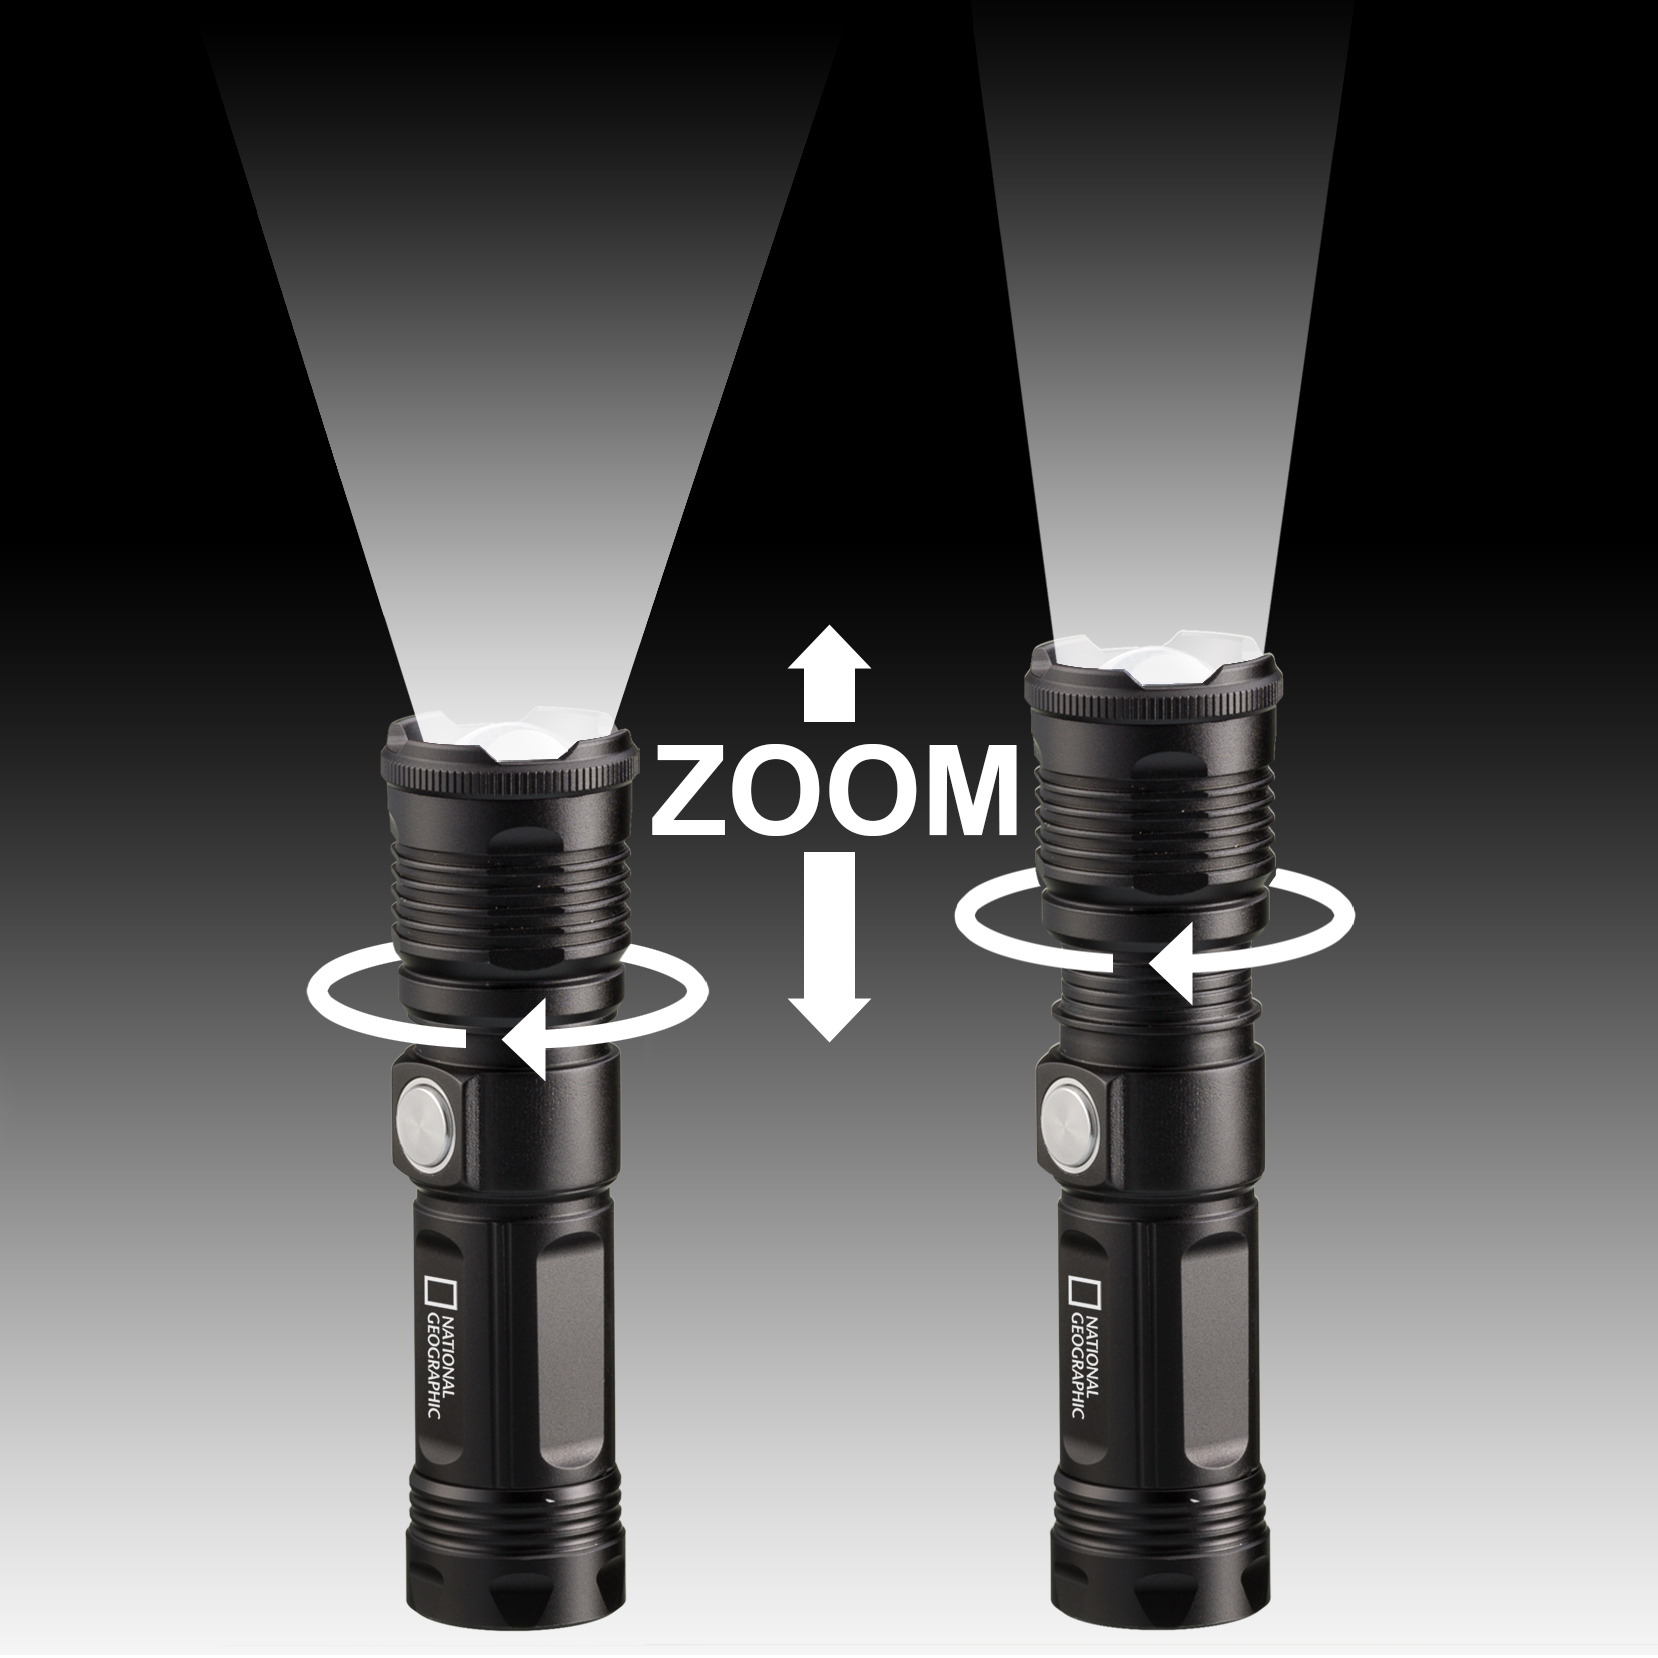 NATIONAL GEOGRAPHIC ILUMINOS 1000 LED Zoom-Taschenlampe 1000 lm